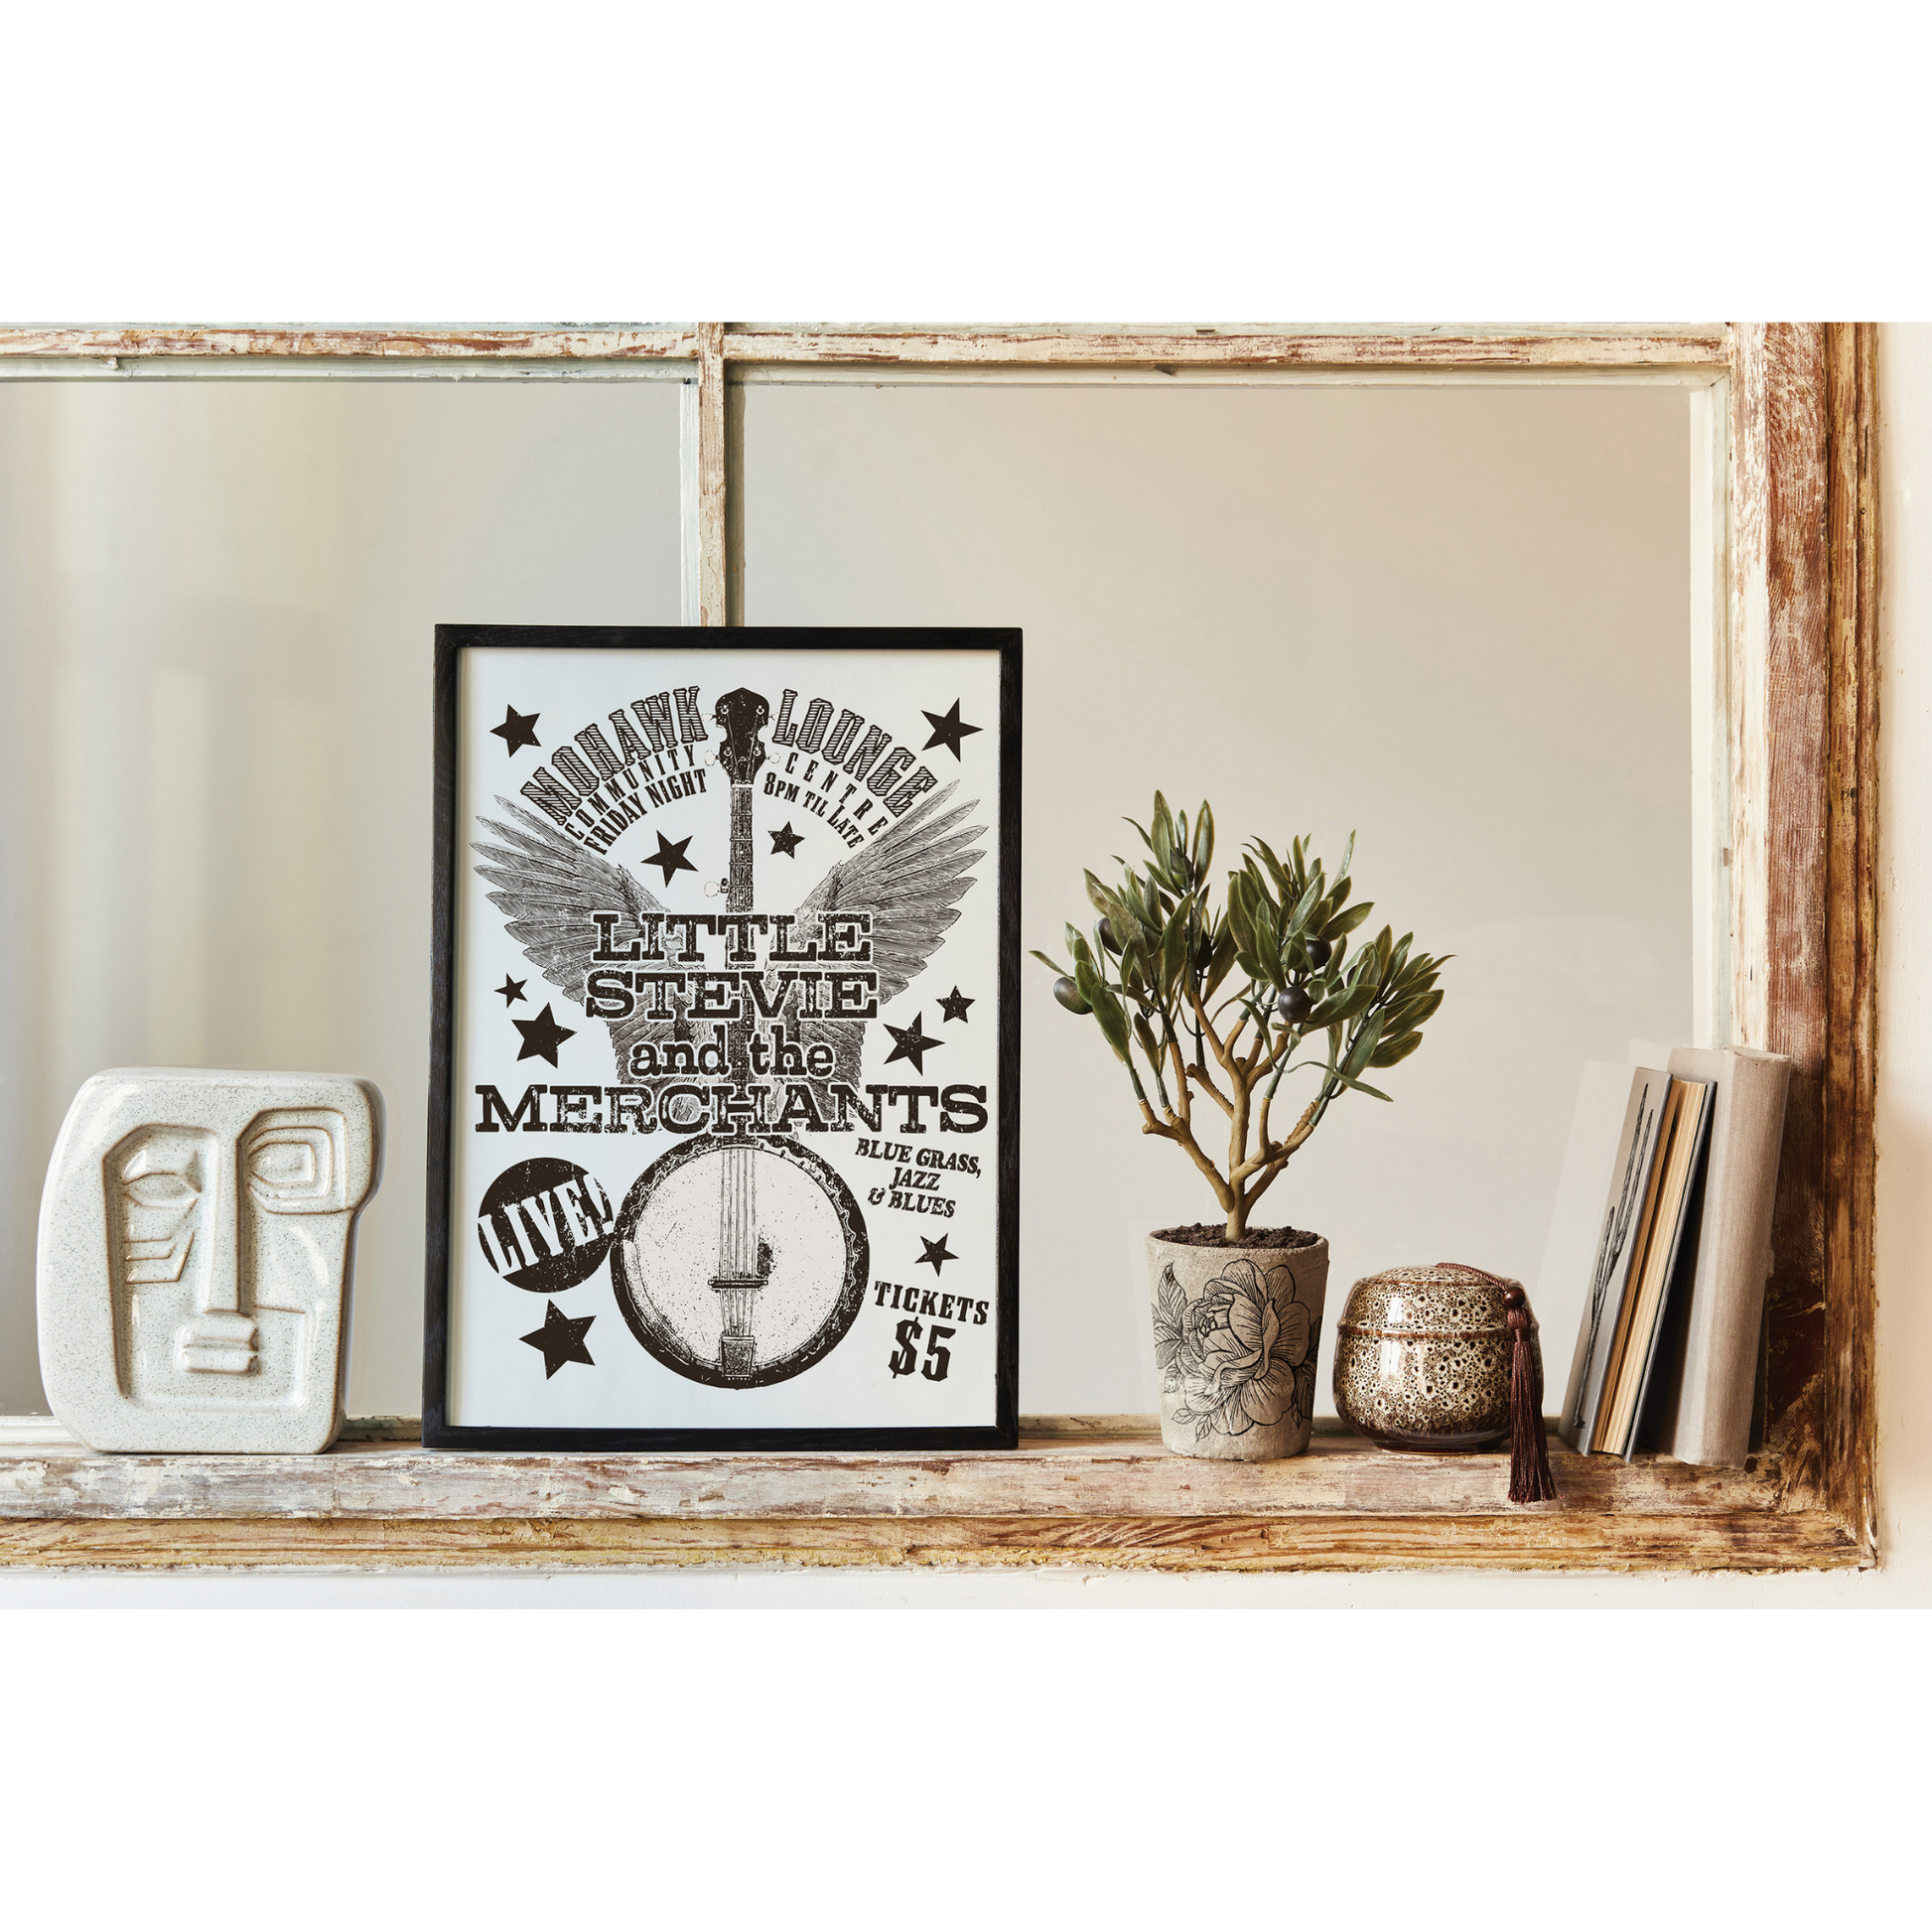 Desperado IOD rub-on furniture transfer by Iron Orchid Designs.  Example on framed picture. Available at Milton's Daughter.